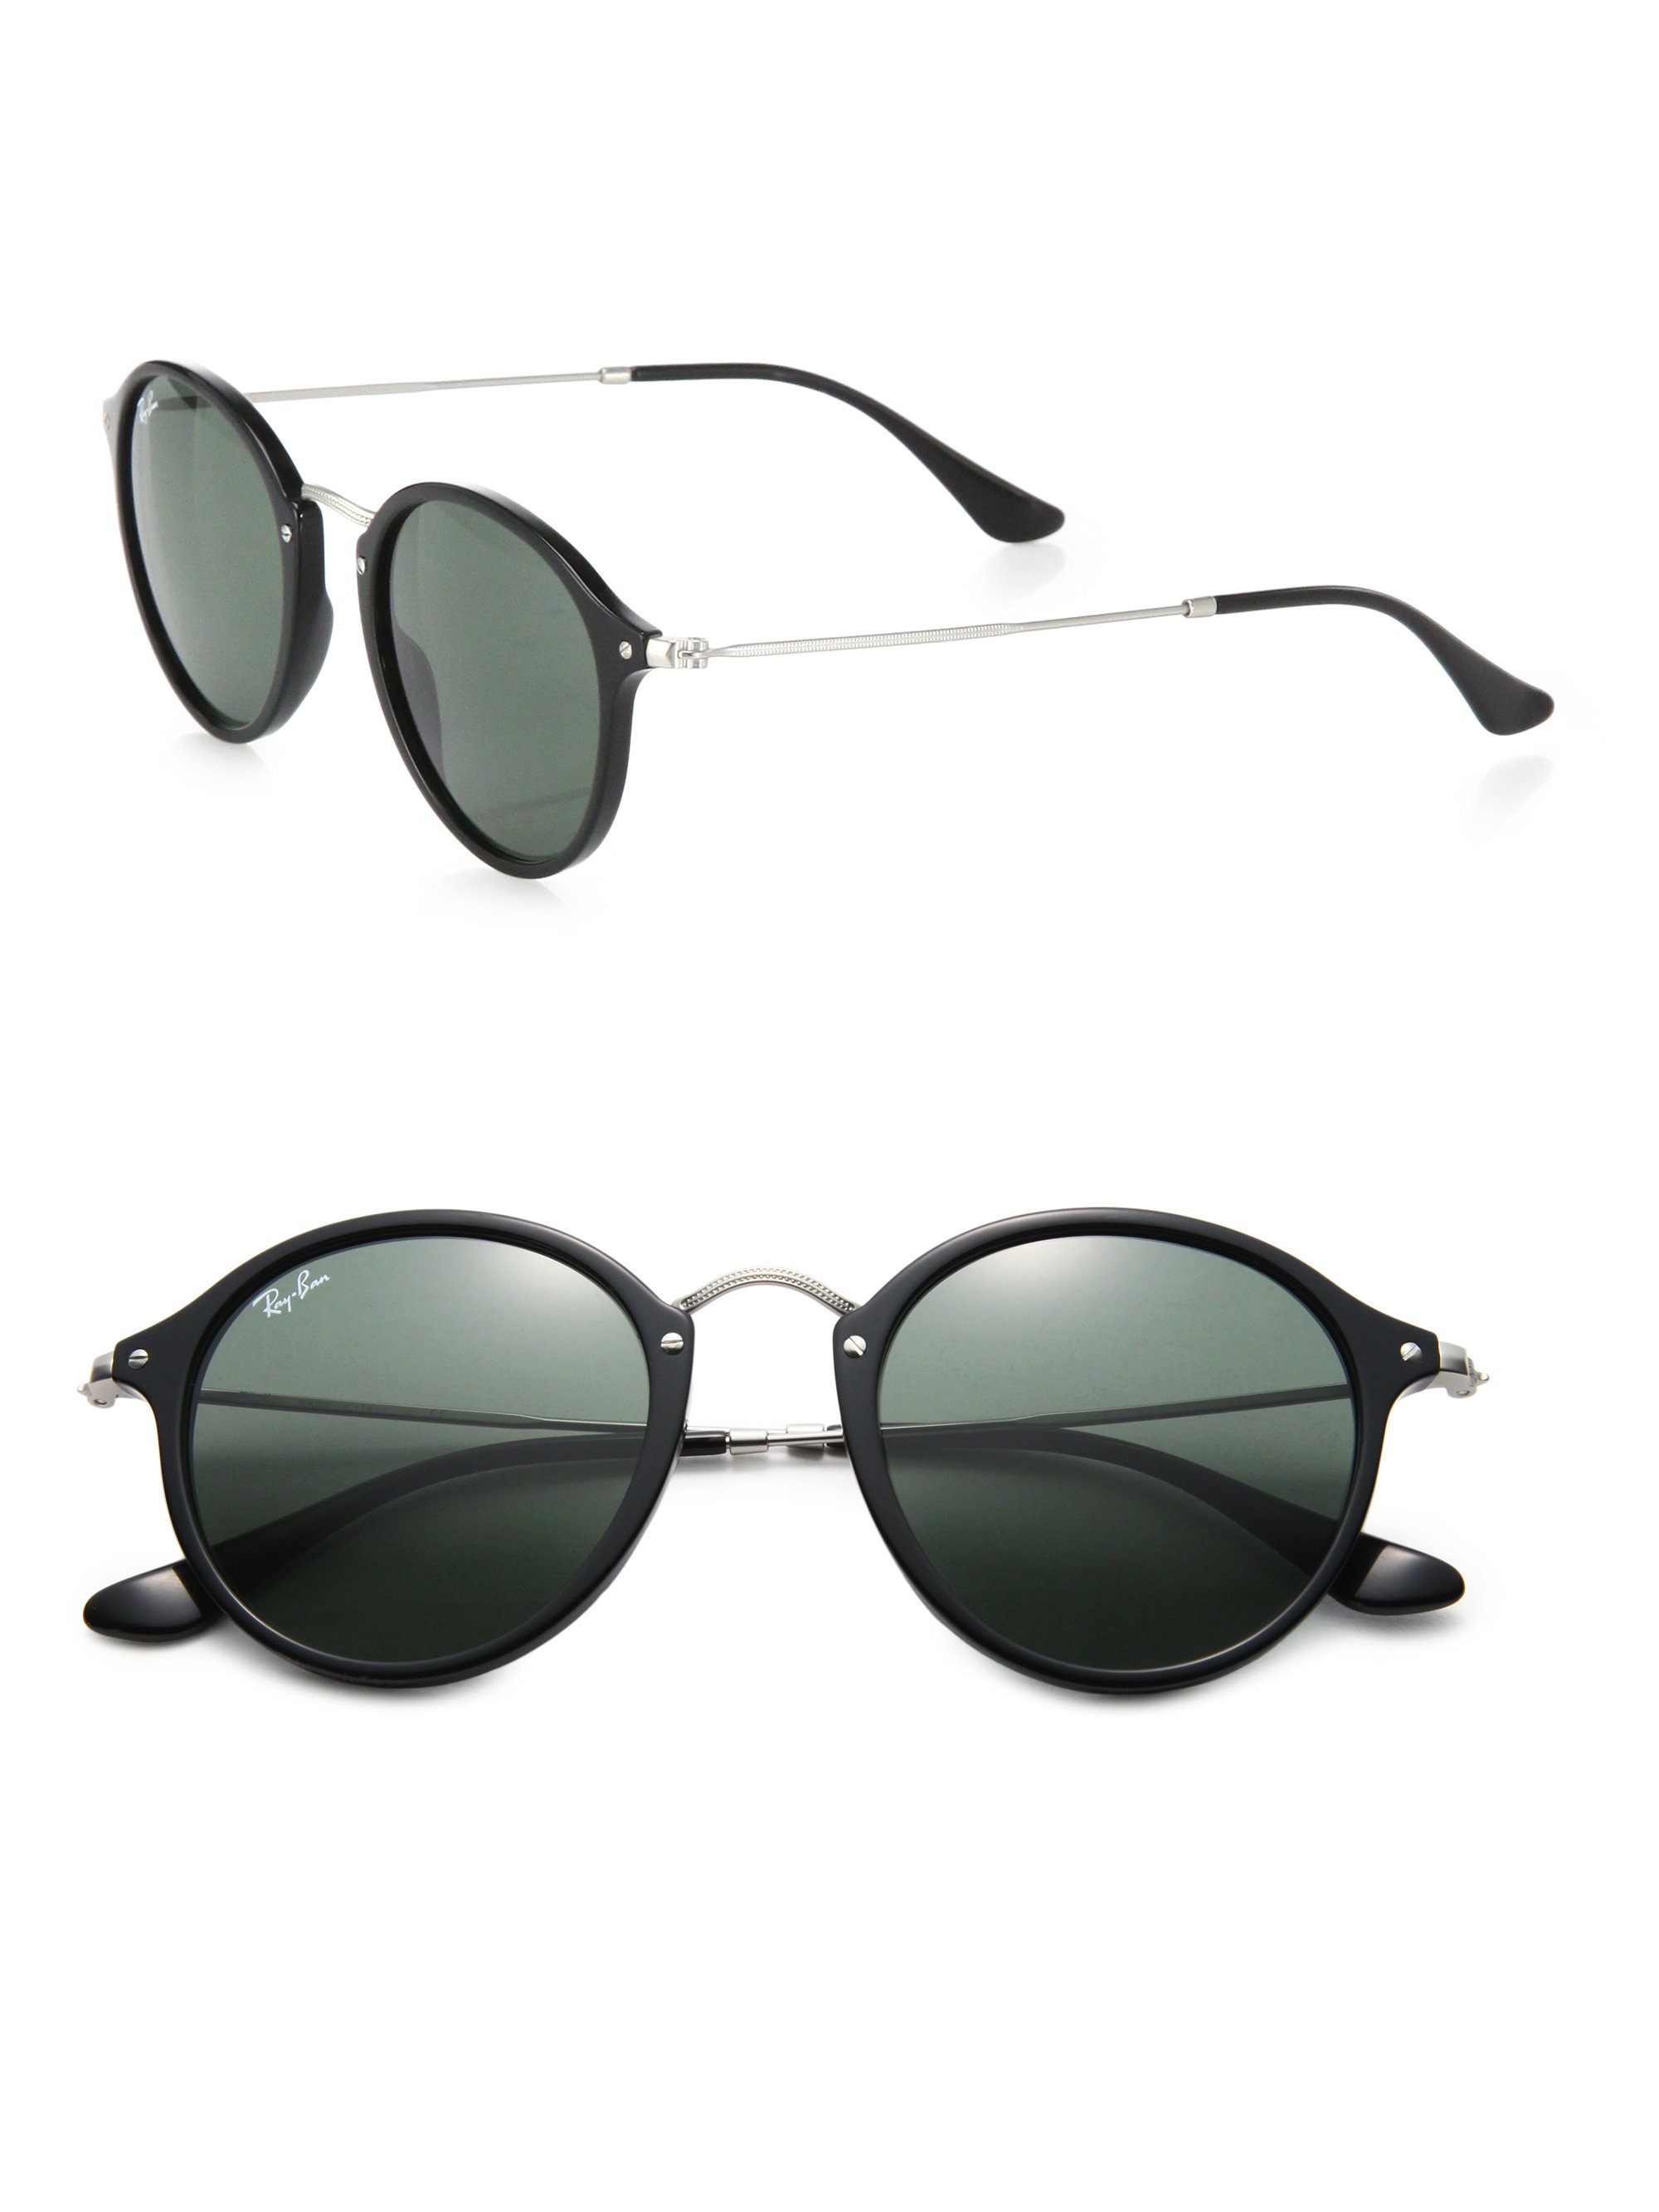 Ray Ban Black 49mm Round Sunglasses Product 0 287217562 Normal 